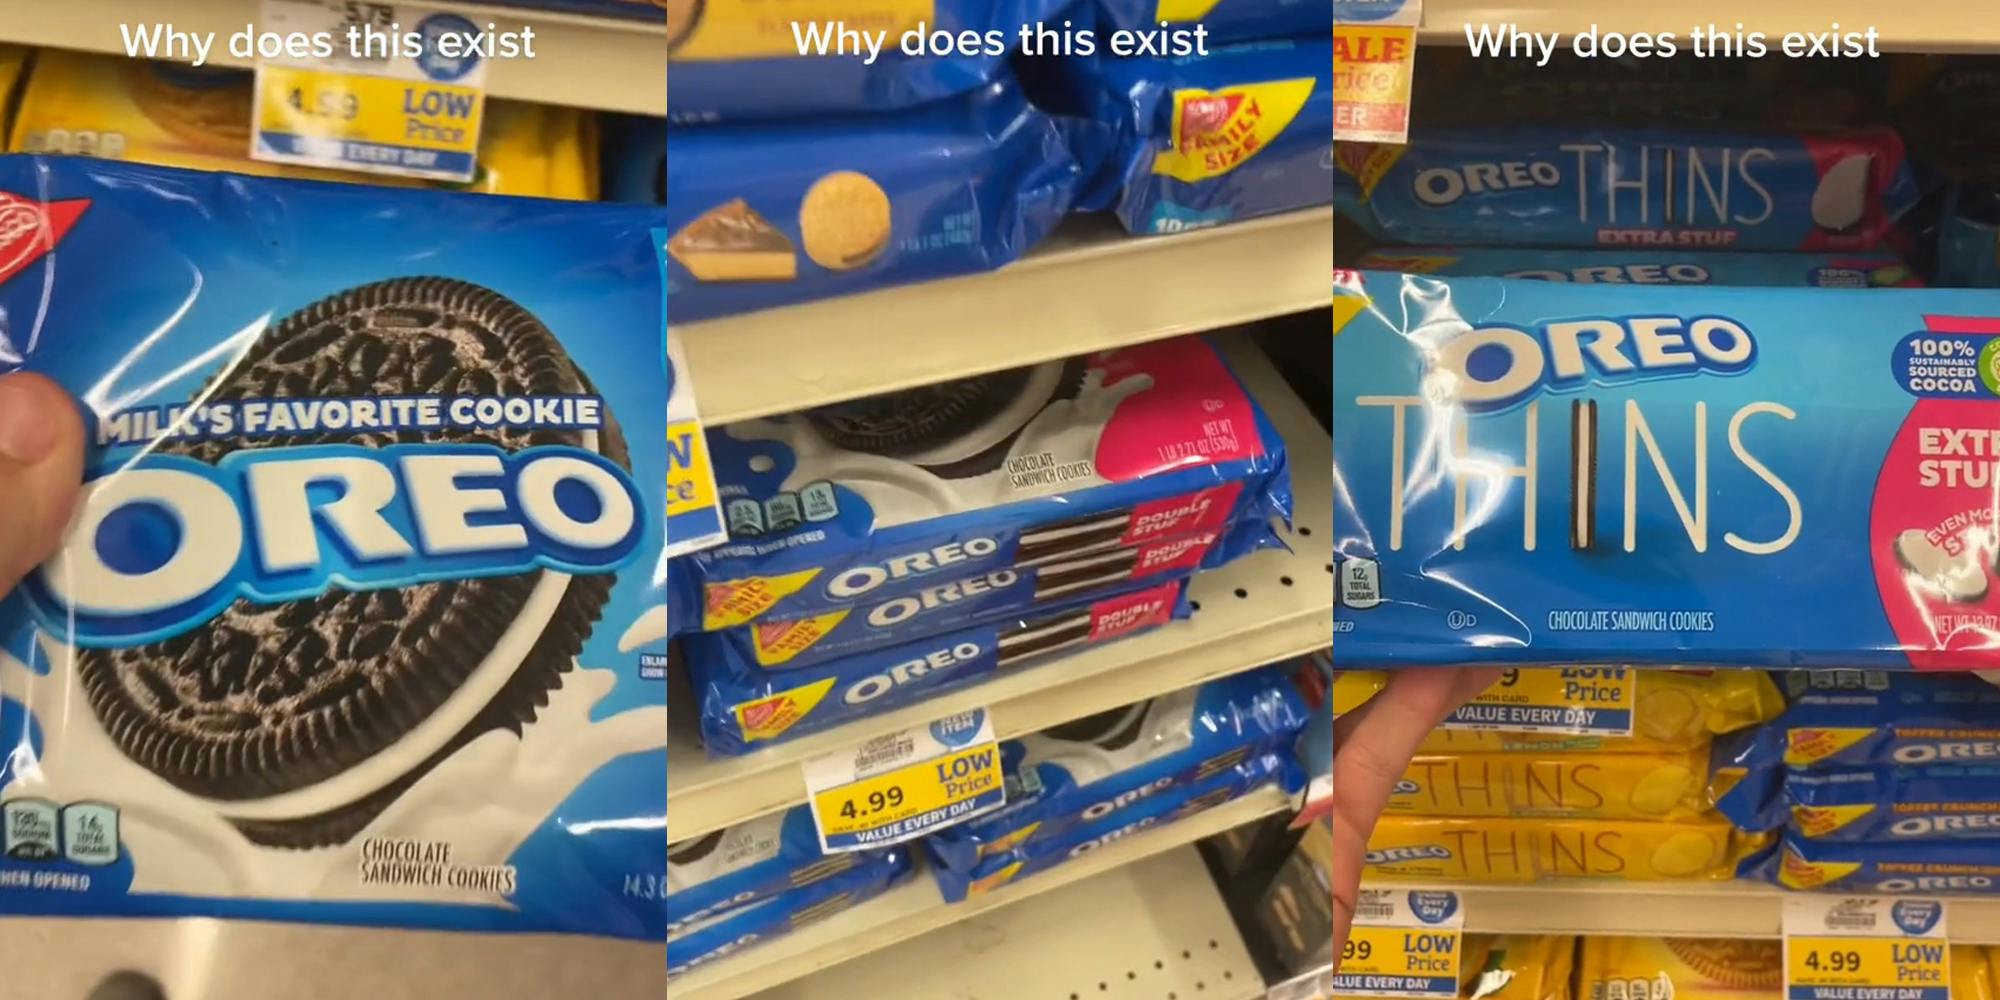 Oreo's in shoppers hand at store with caption "Why does this exist" (l) Double Stuff Oreo's on shelf at store with caption "Why does this exist" (c) Thins Extra Stuff Oreo's in shoppers hand at store with caption "Why does this exist" (r)